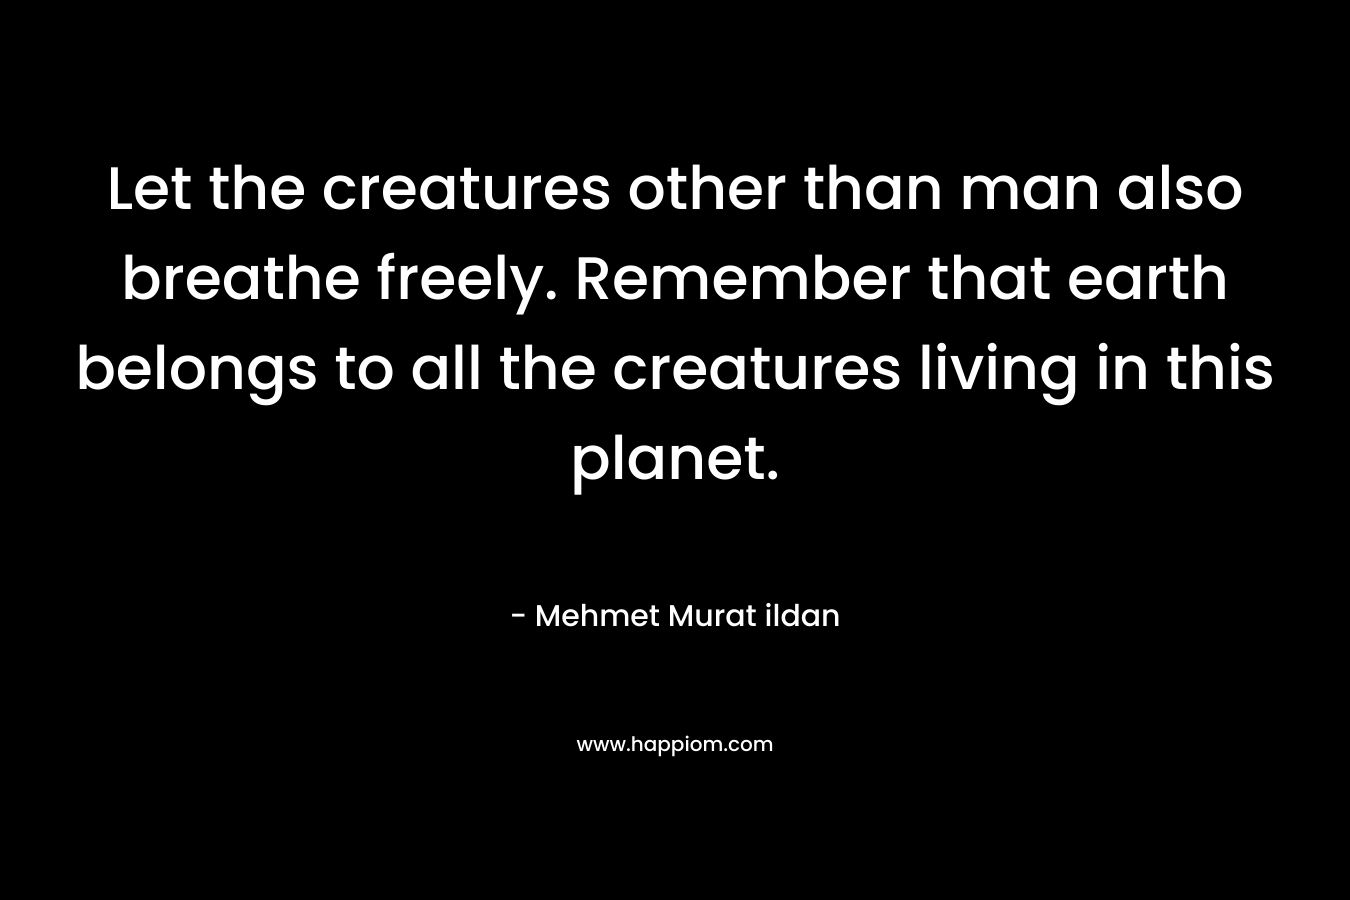 Let the creatures other than man also breathe freely. Remember that earth belongs to all the creatures living in this planet.